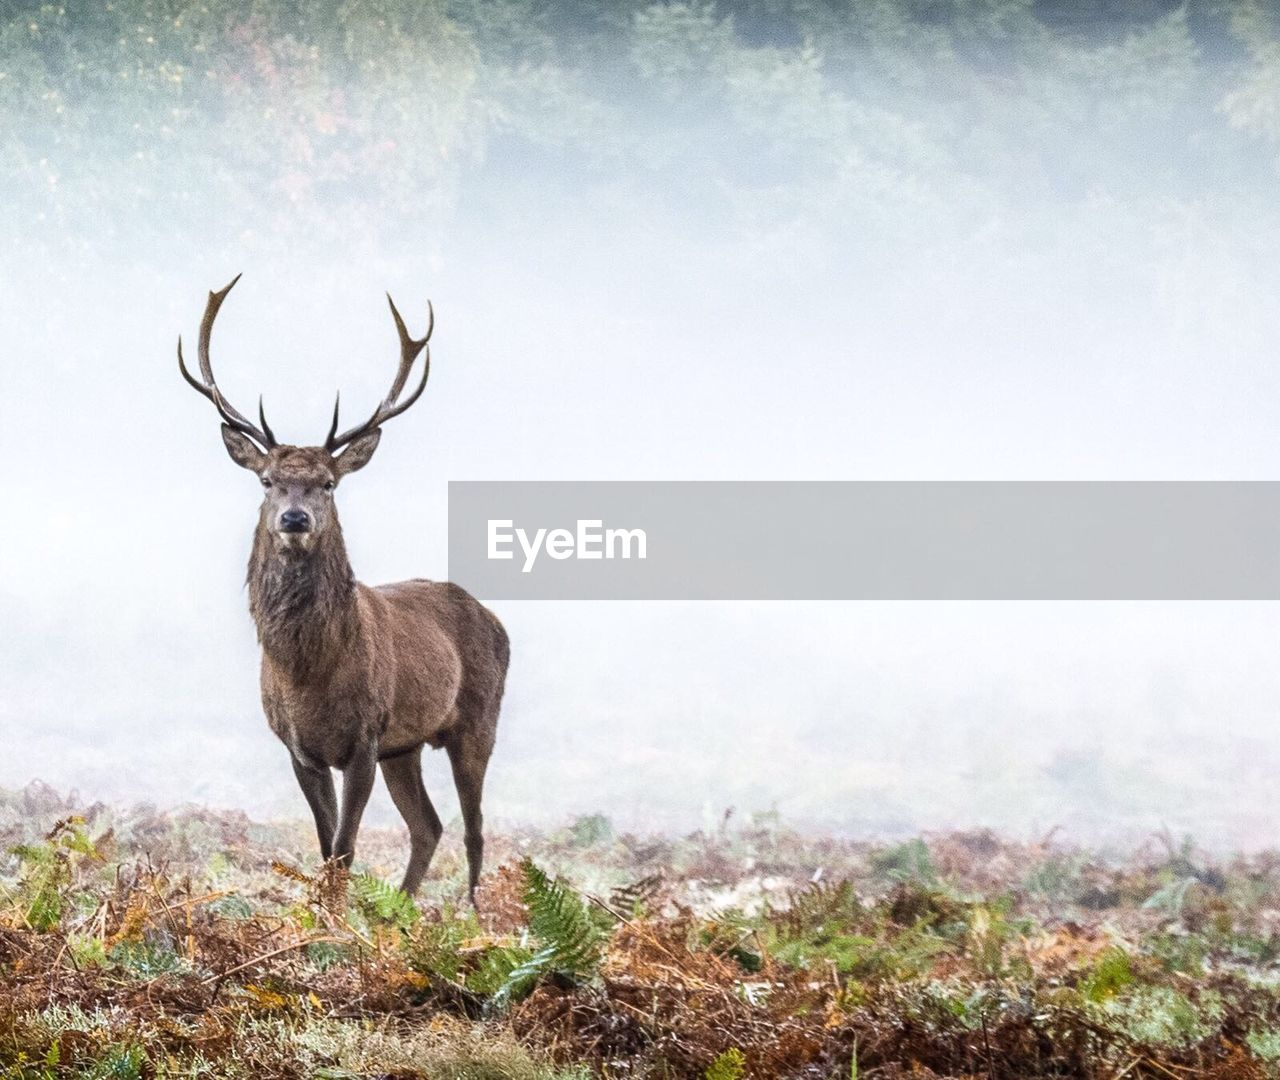 Elk against foggy weather in forest